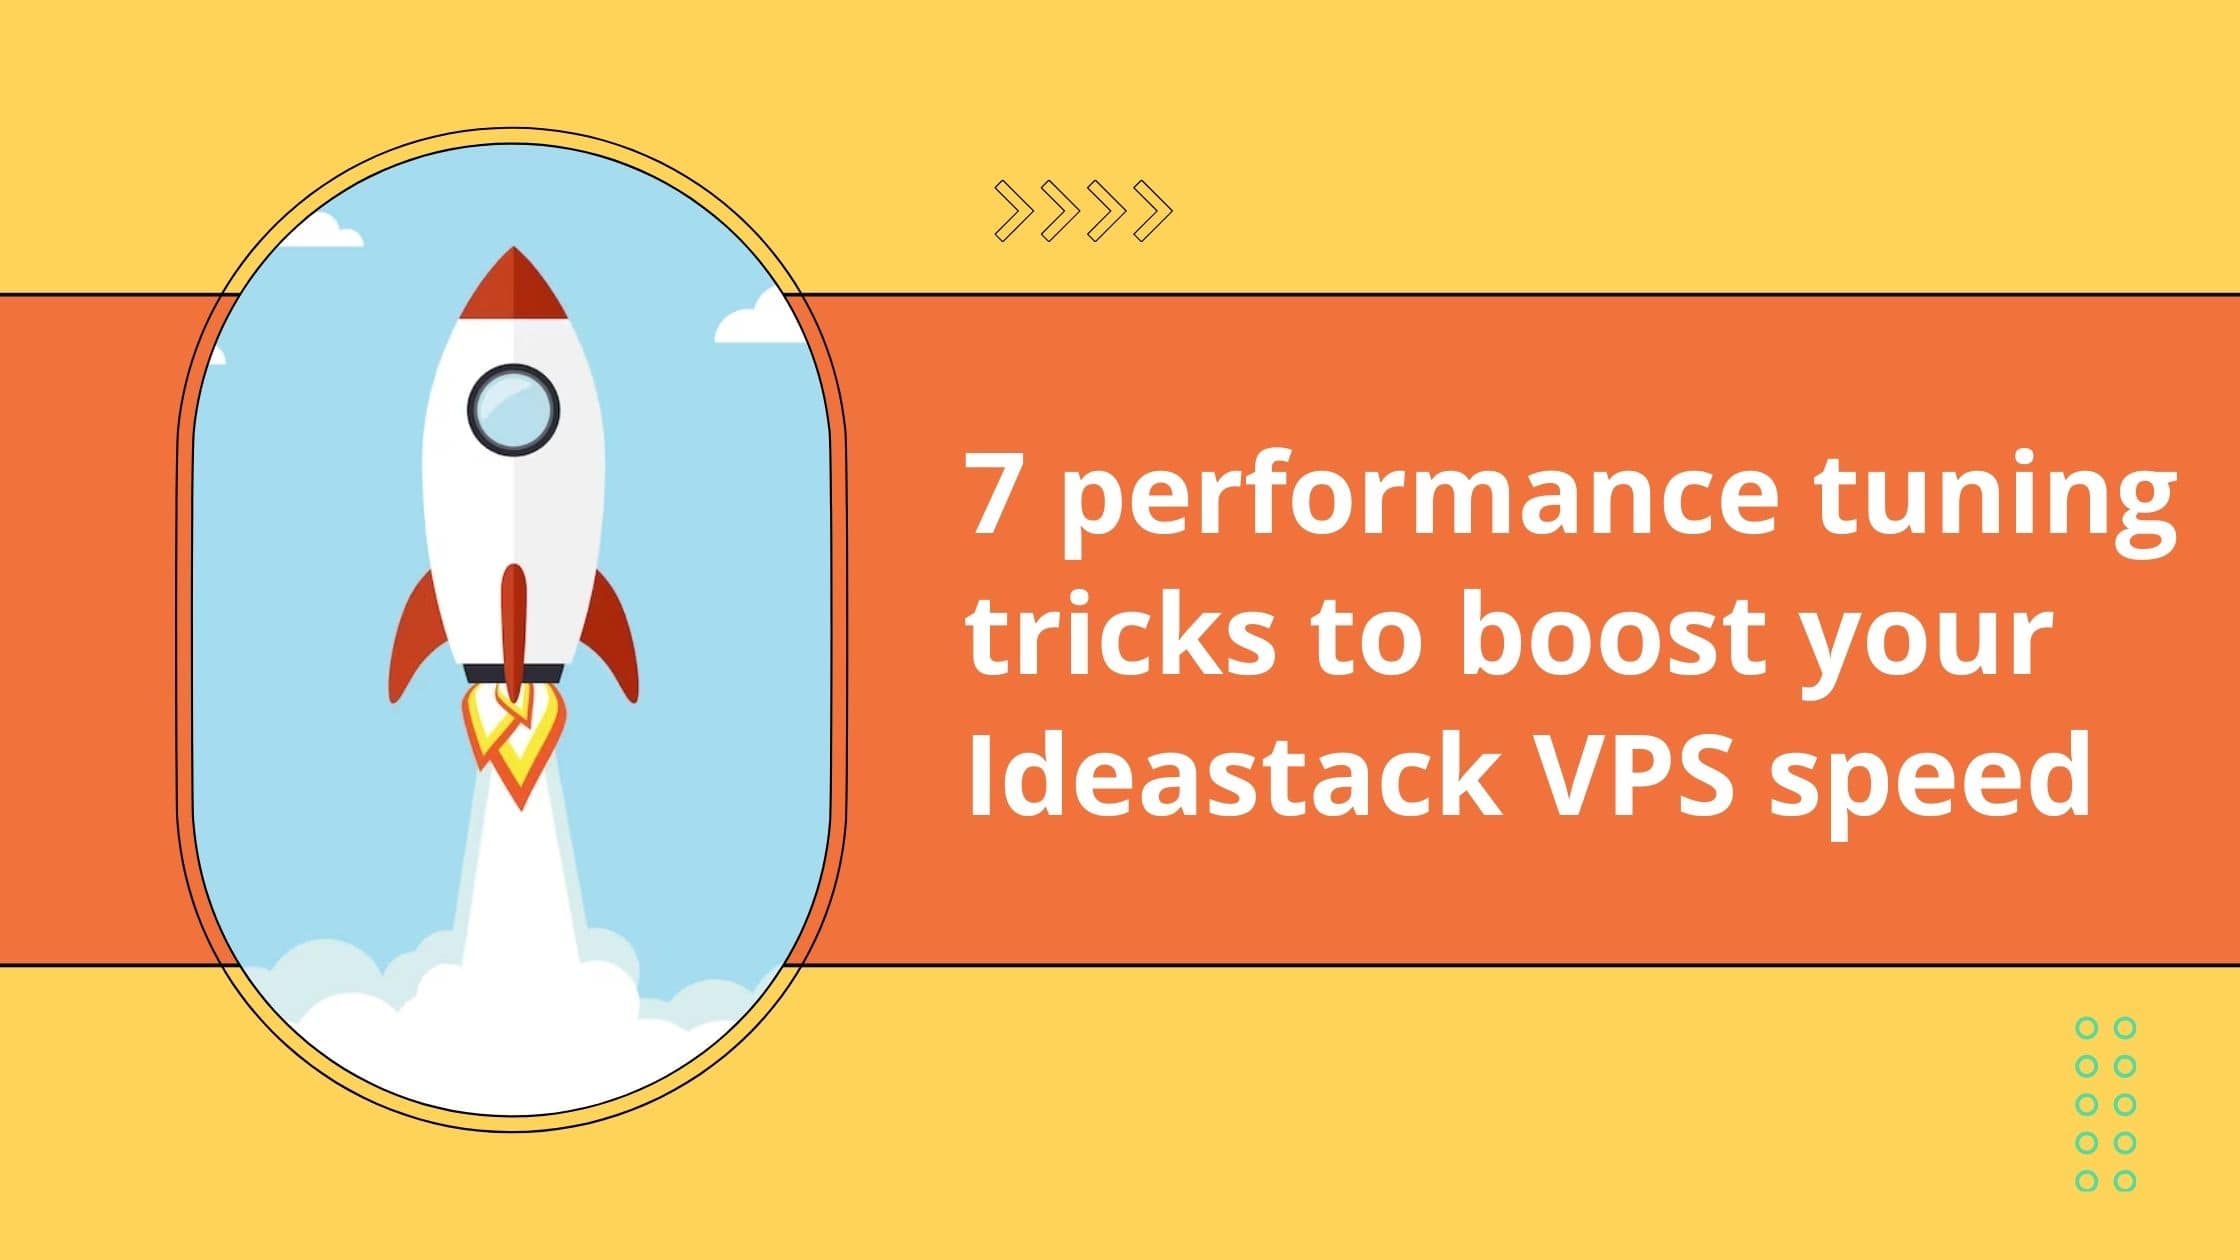 7 performance tuning tricks to boost your Ideastack VPS speed